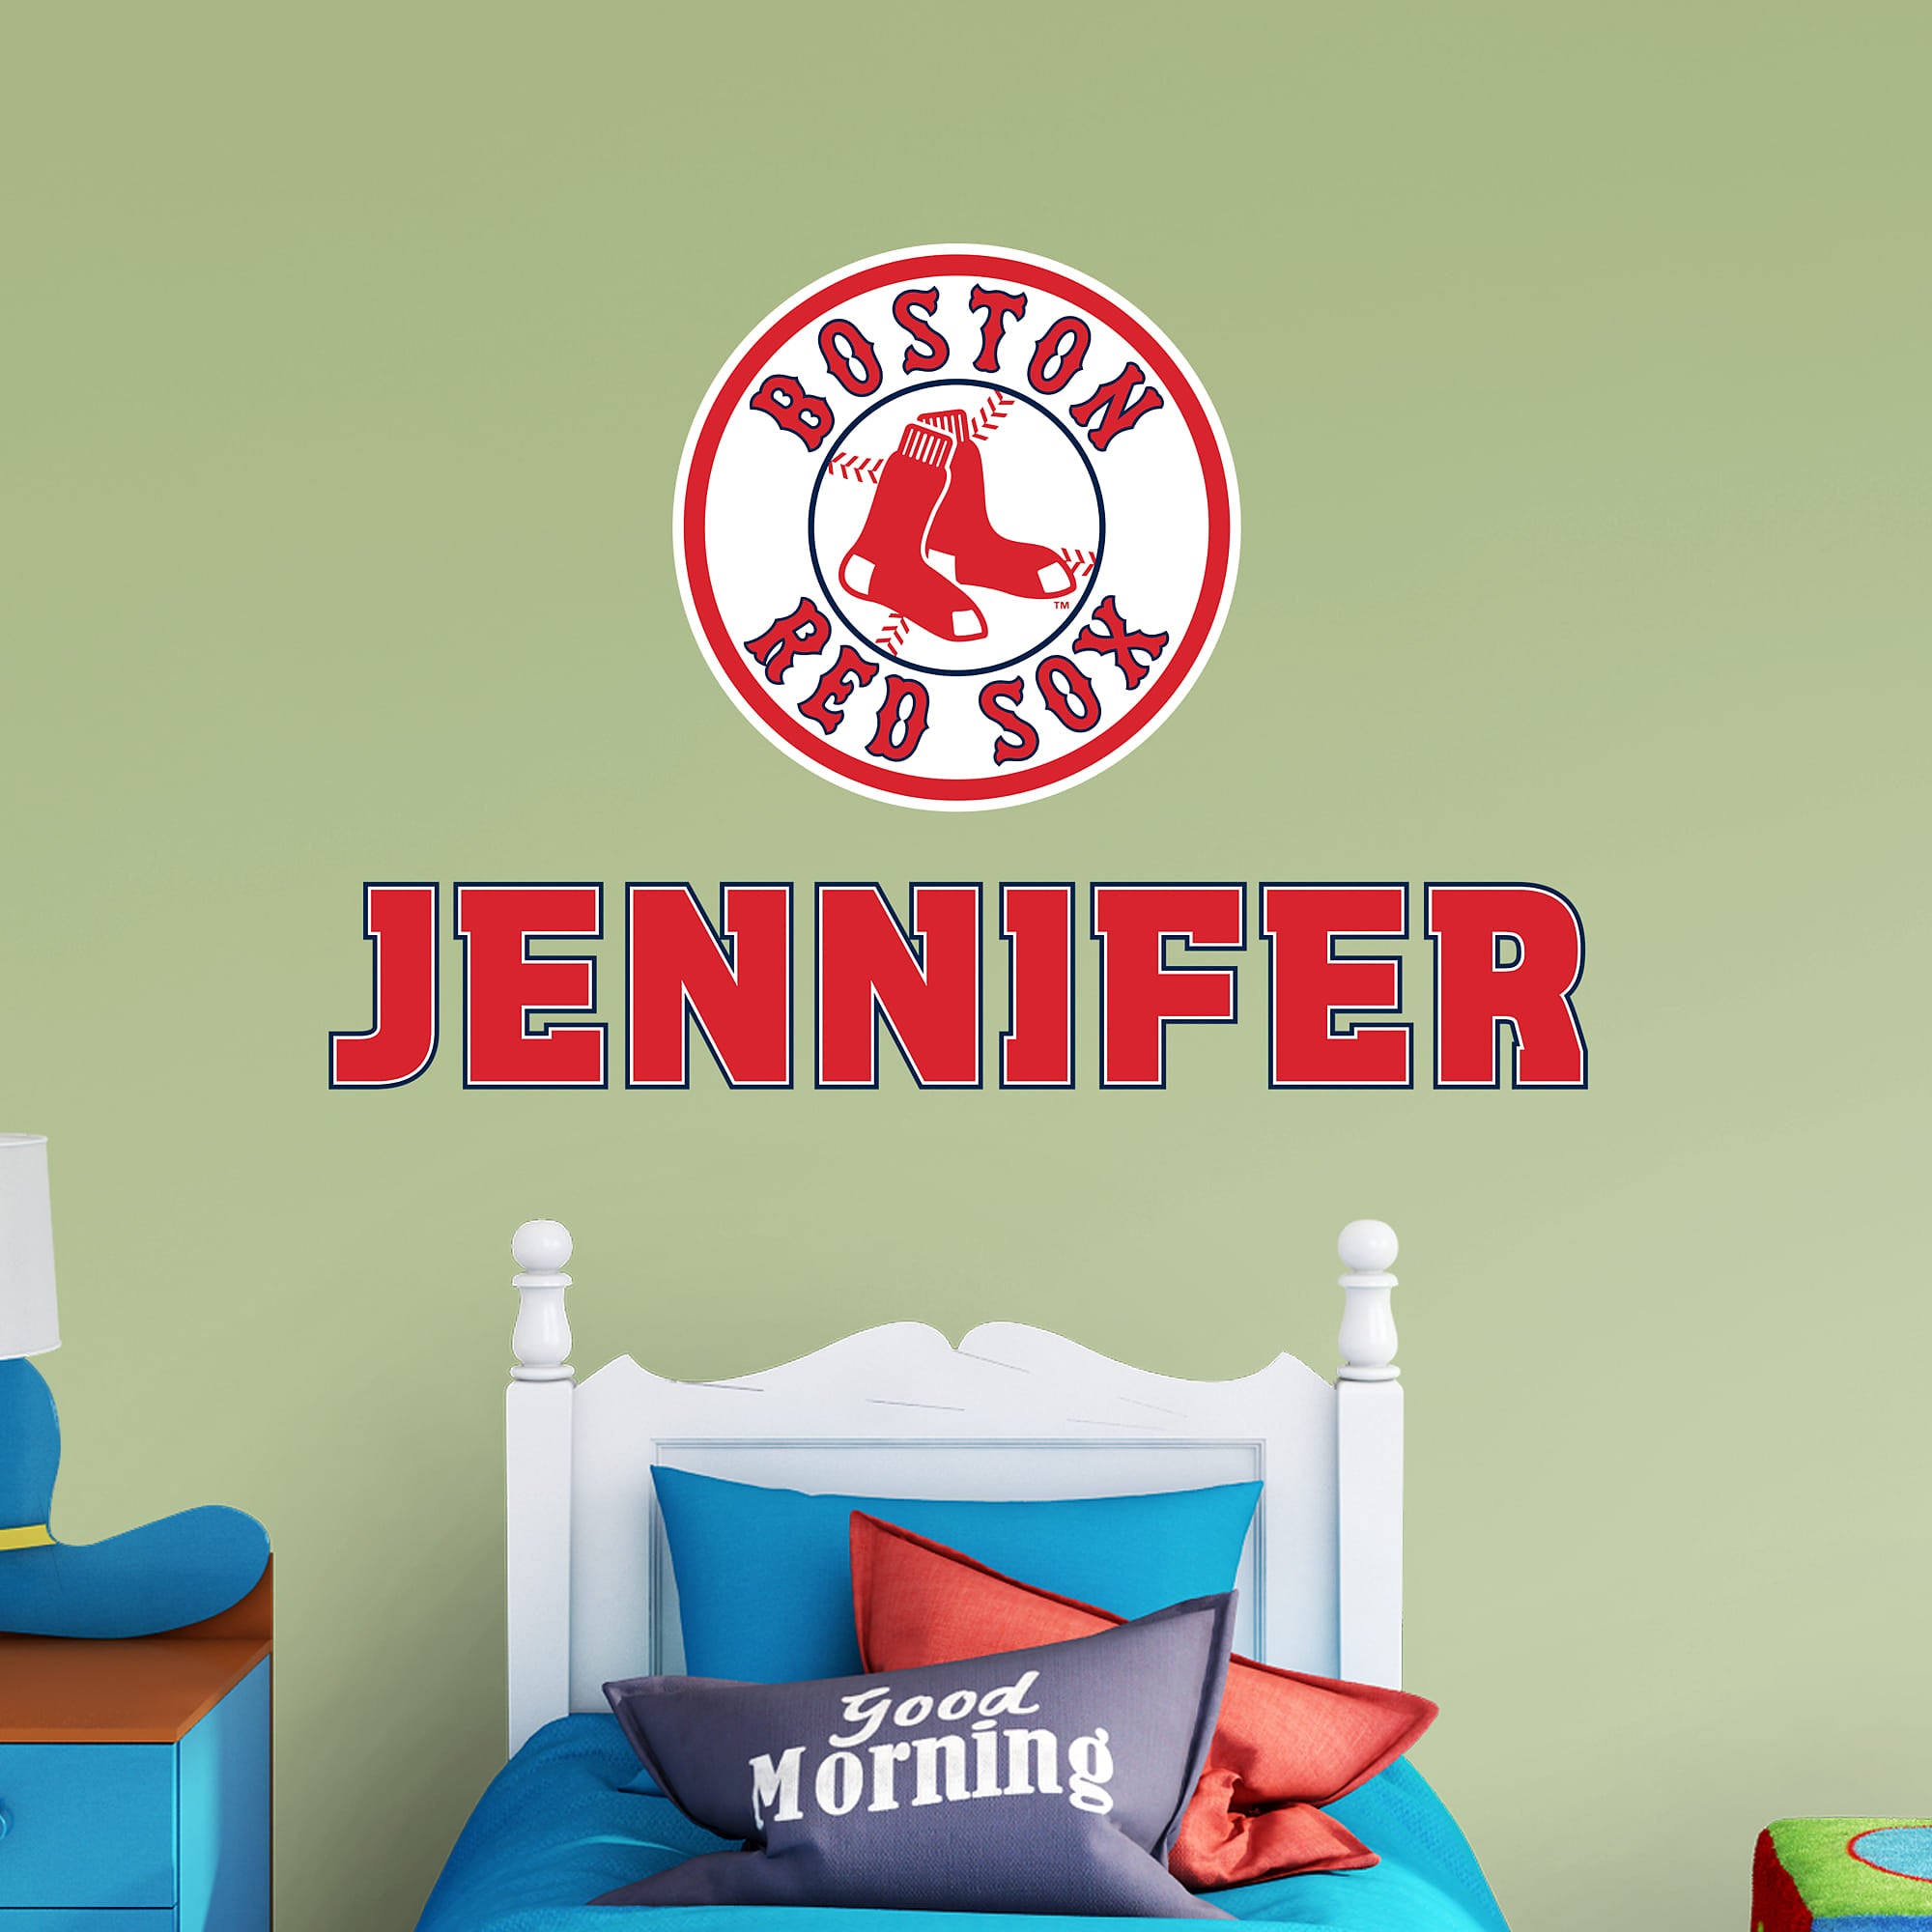 Boston Red Sox: Circle Stacked Personalized Name - Officially Licensed MLB Transfer Decal in Red (52"W x 39.5"H) by Fathead | Vi